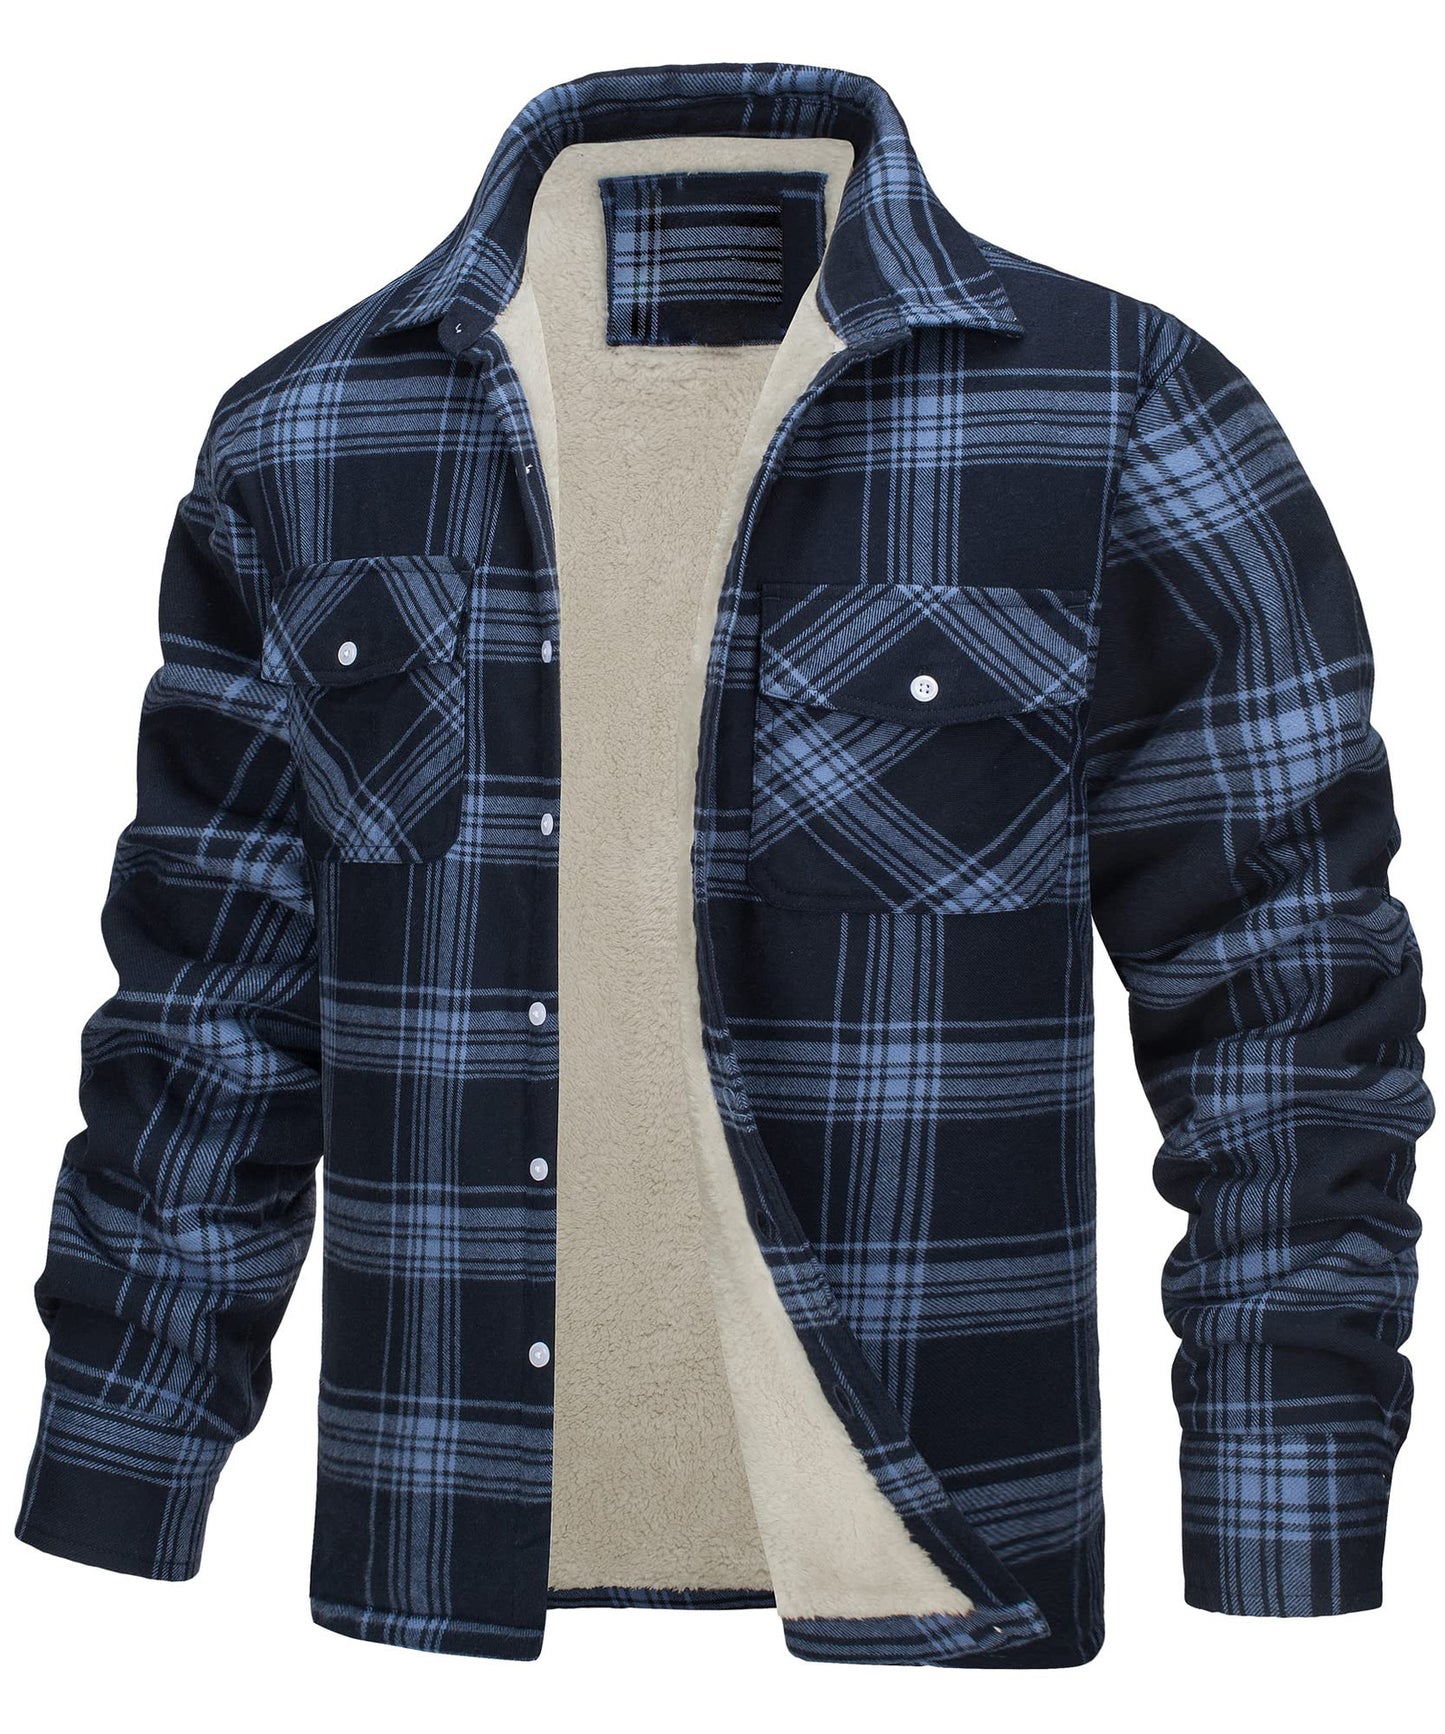 Casual Long Sleeves Thicken Shirts Jackets for Men